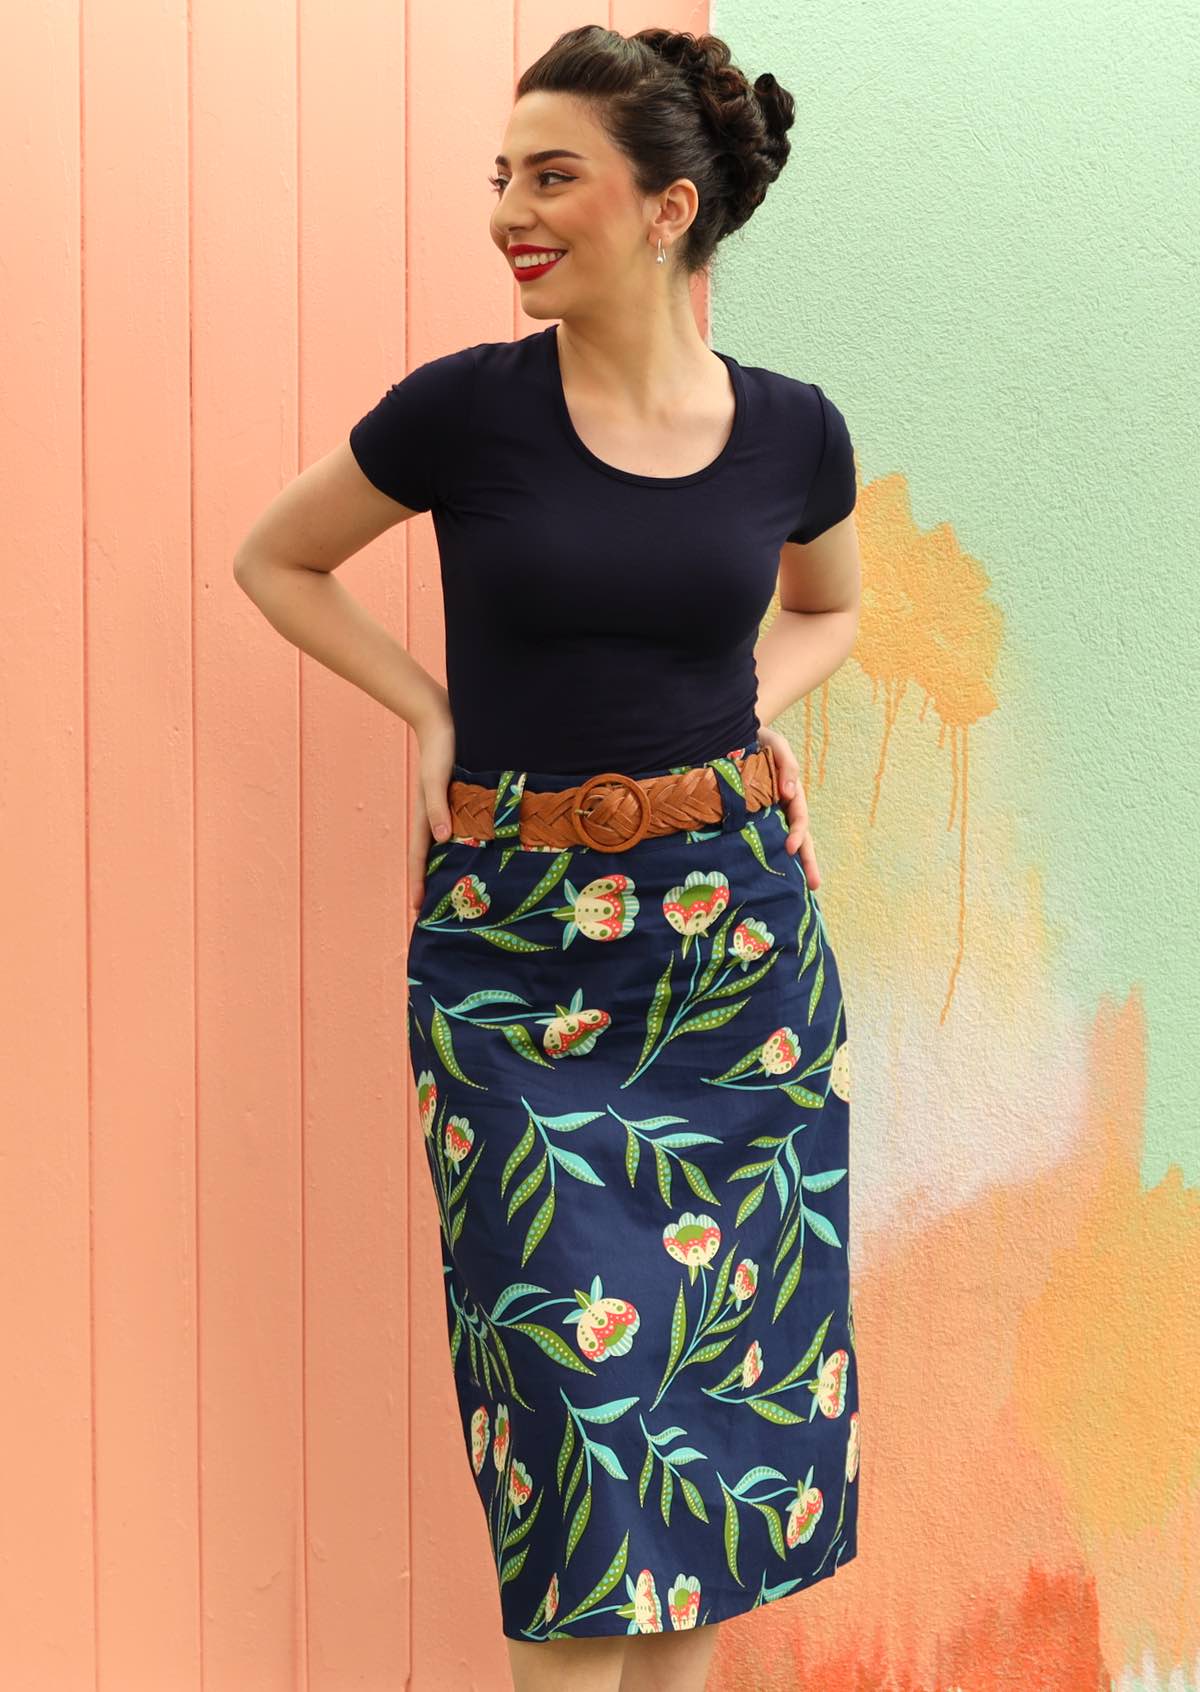 Model wears floral print skirt on a navy base.